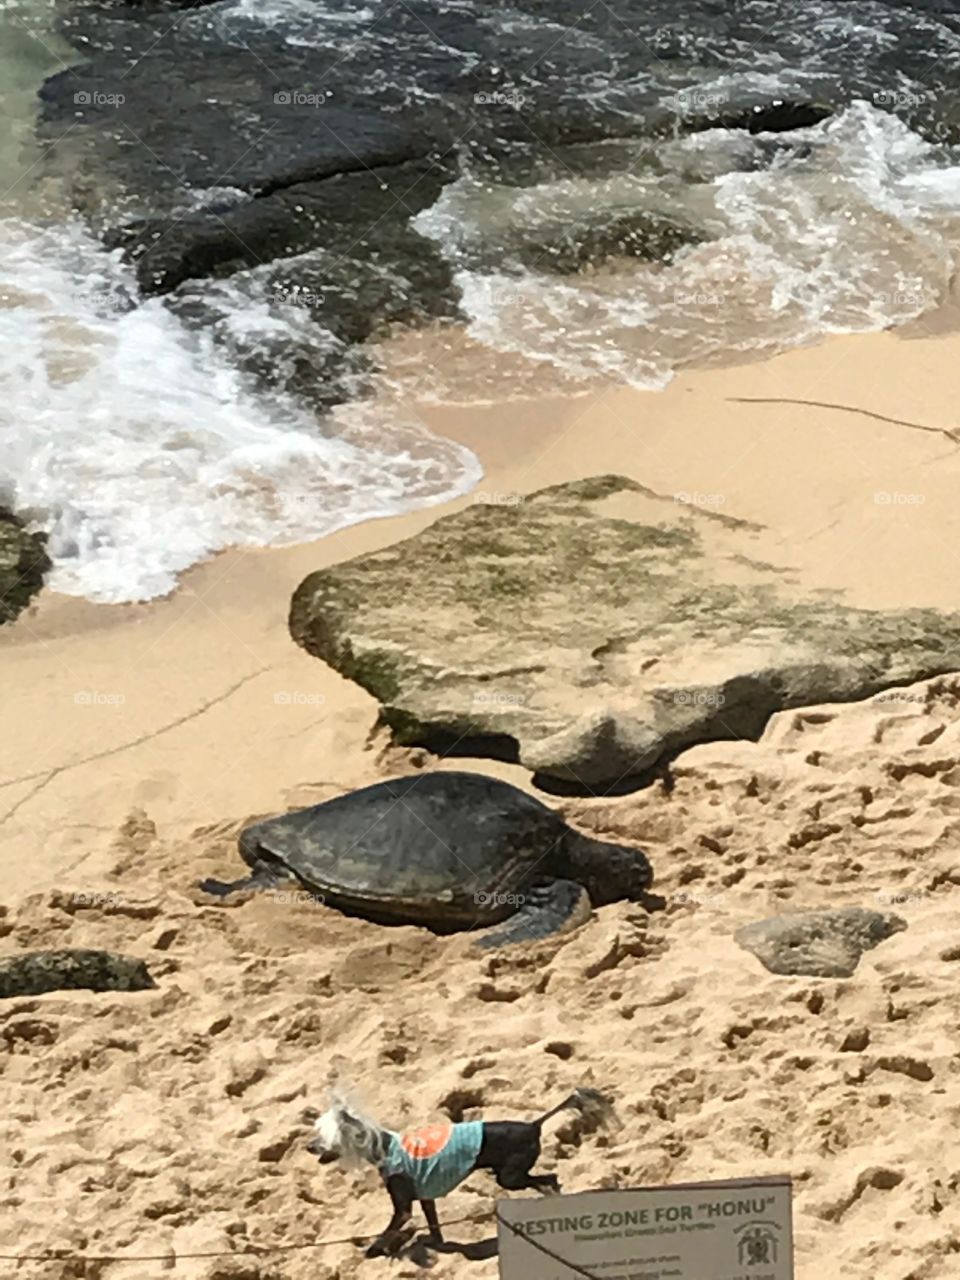 Turtles in Maui